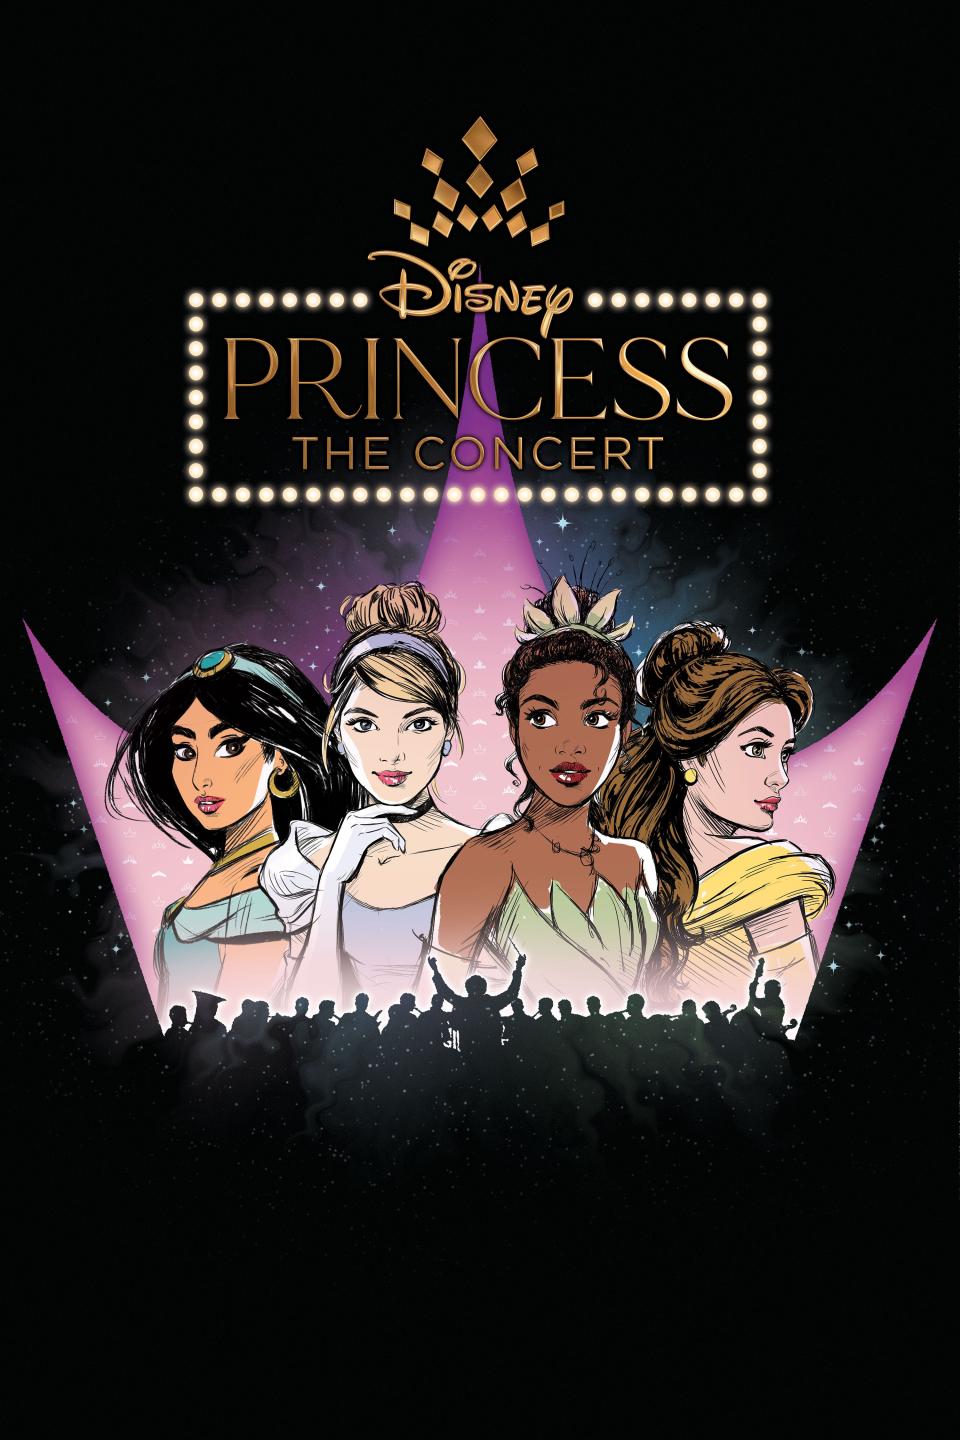 "Disney Princess – The Concert" is headed to the New Jersey area.